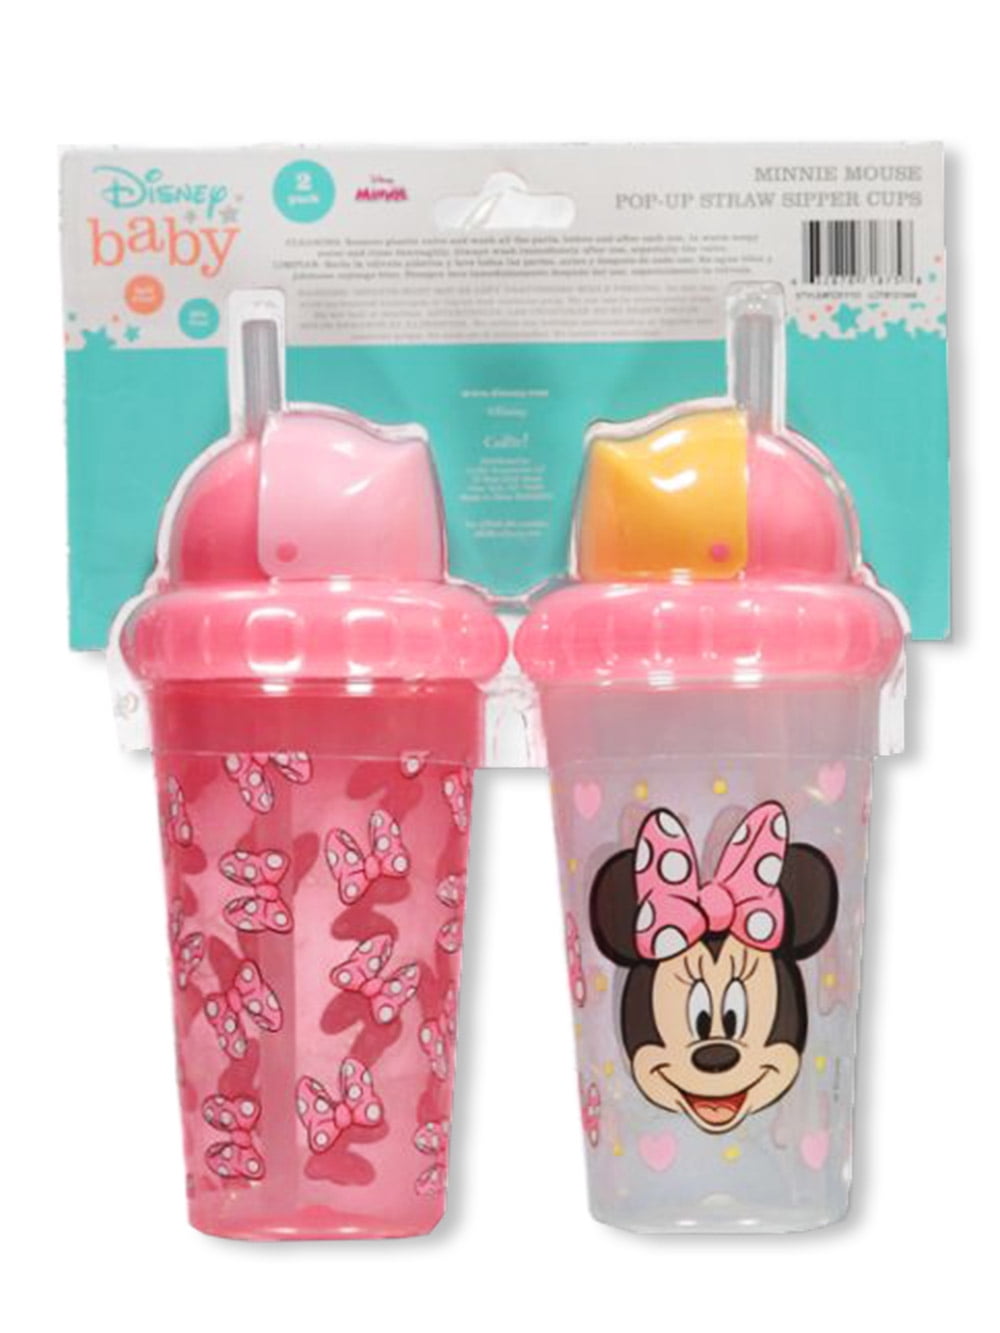 Disney Baby Winnie the Pooh Pop up Straw Cup for Toddler, 10 oz BPA Free  FD51278 